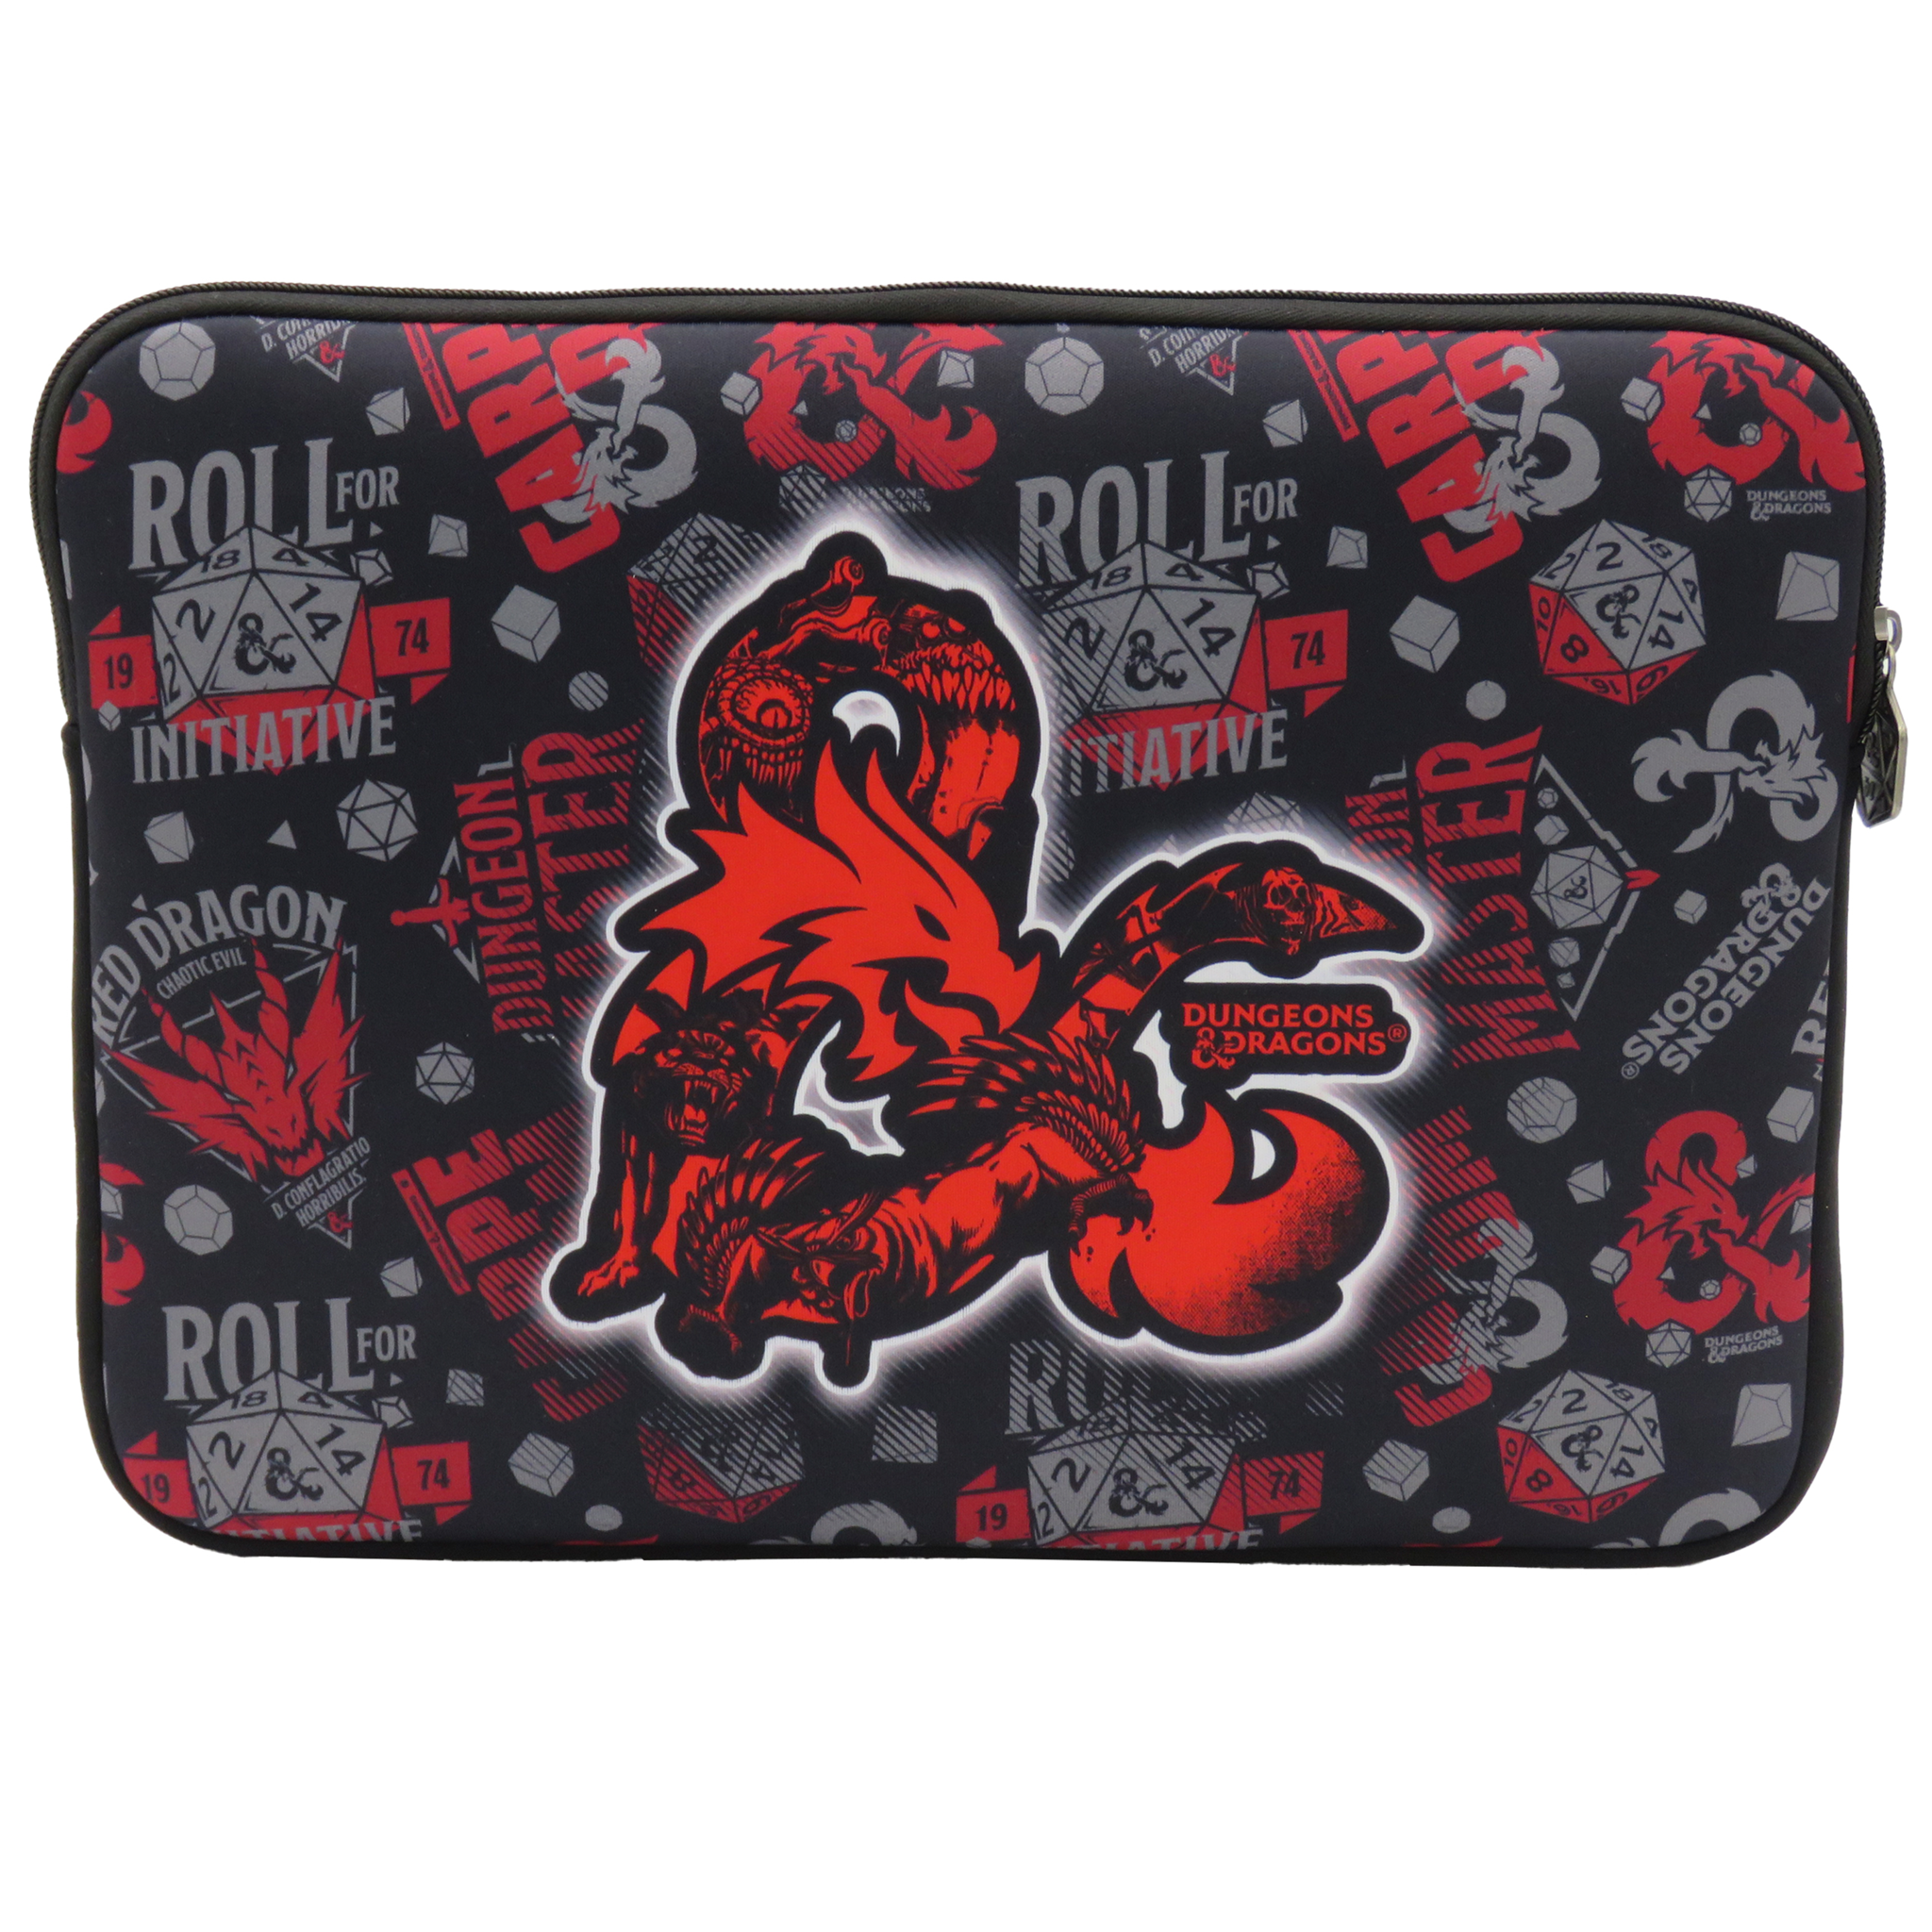 Dungeons & Dragons Laptop Sleeve 14", Monsters - 36 x 26 x 2 cm - Polyester